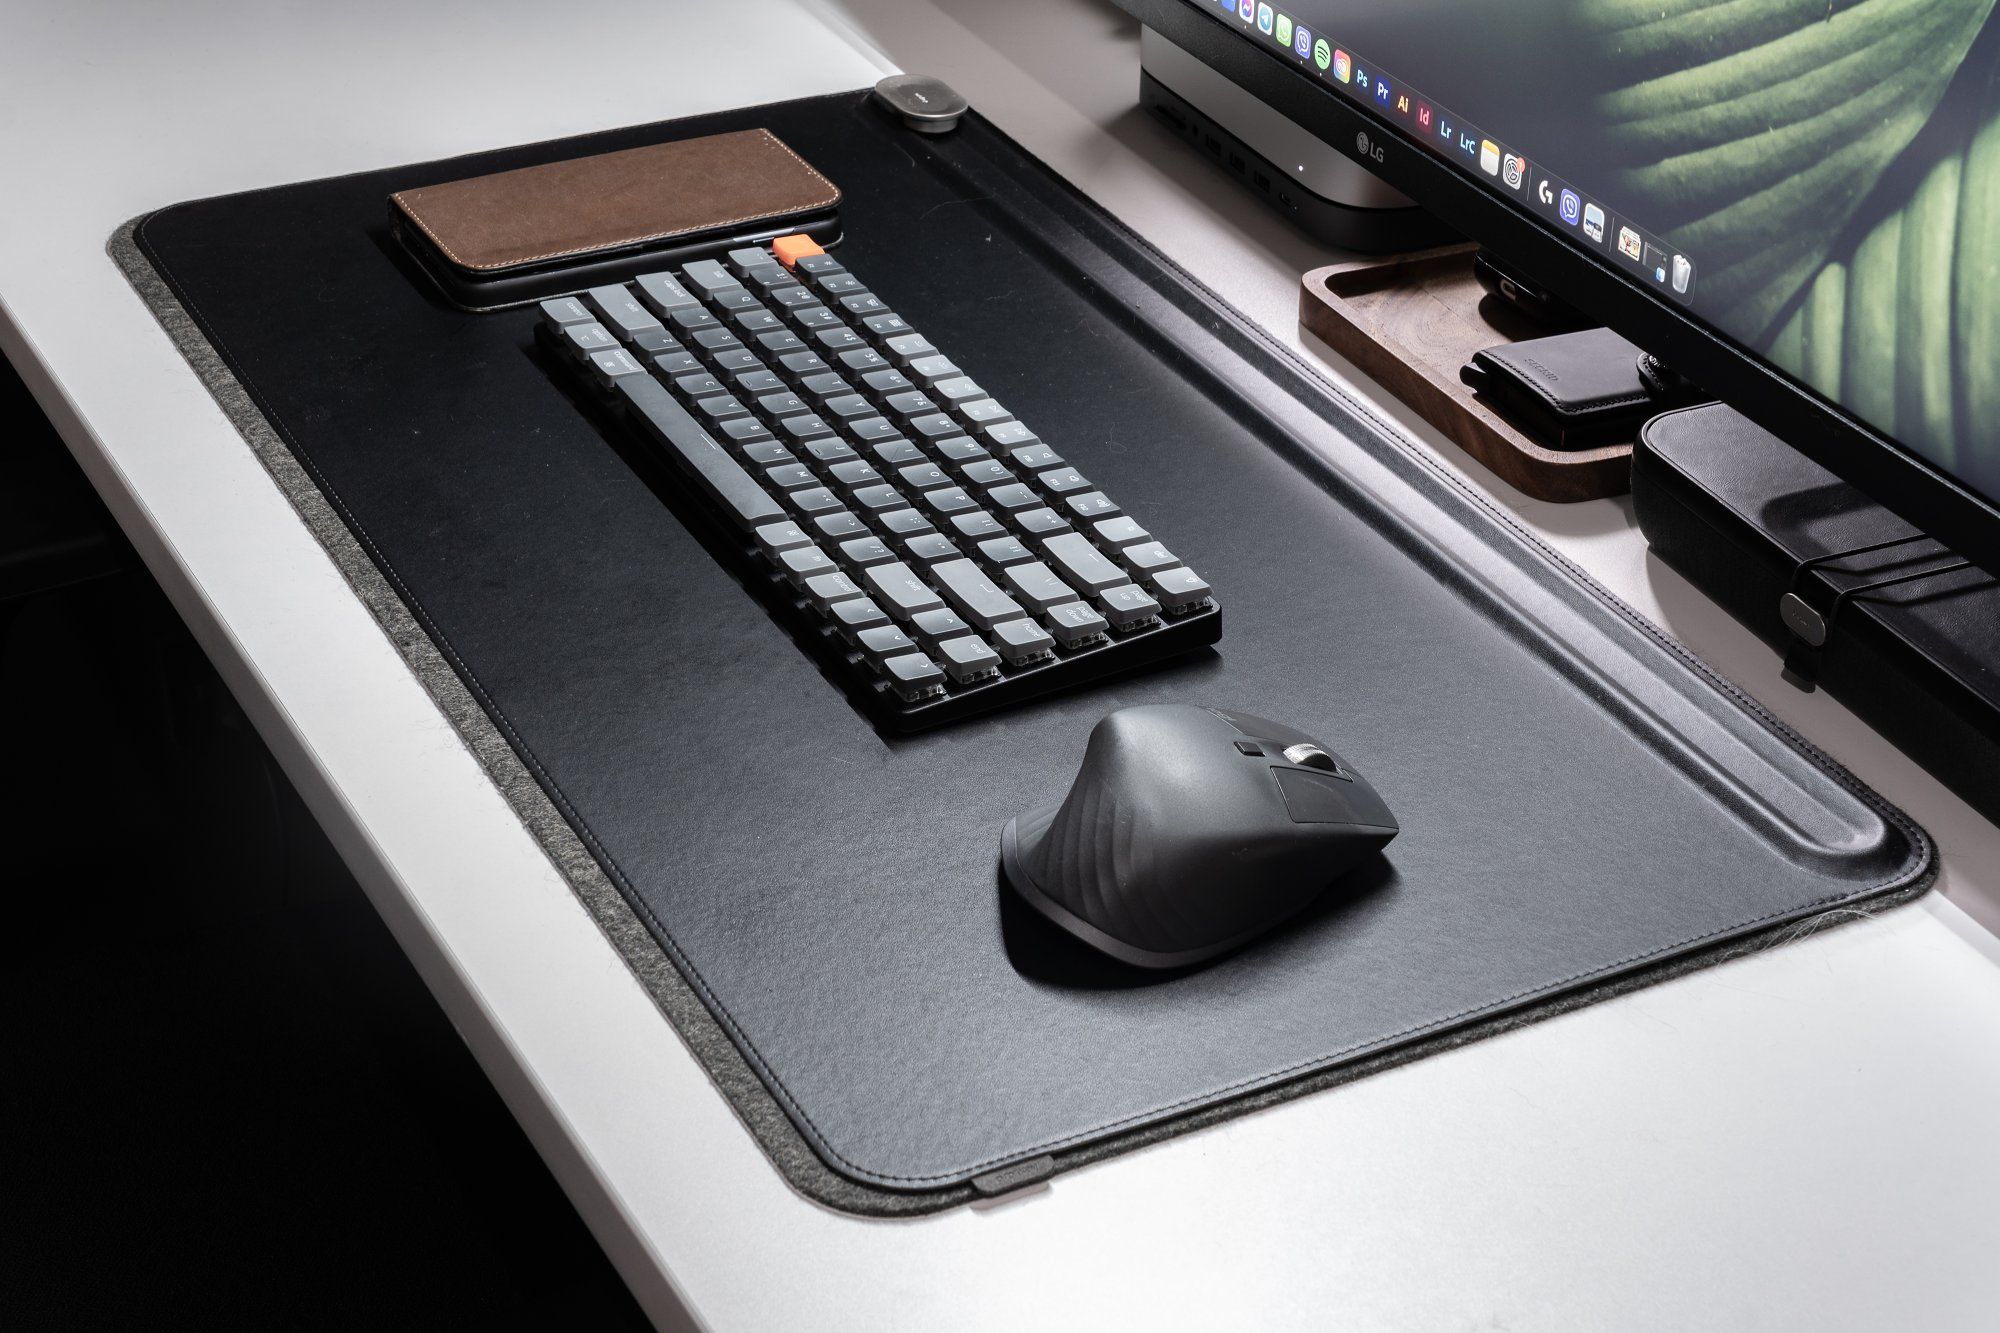 The Keychron K3 wireless mechanical keyboard and the Logitech MX Master 3 mouse